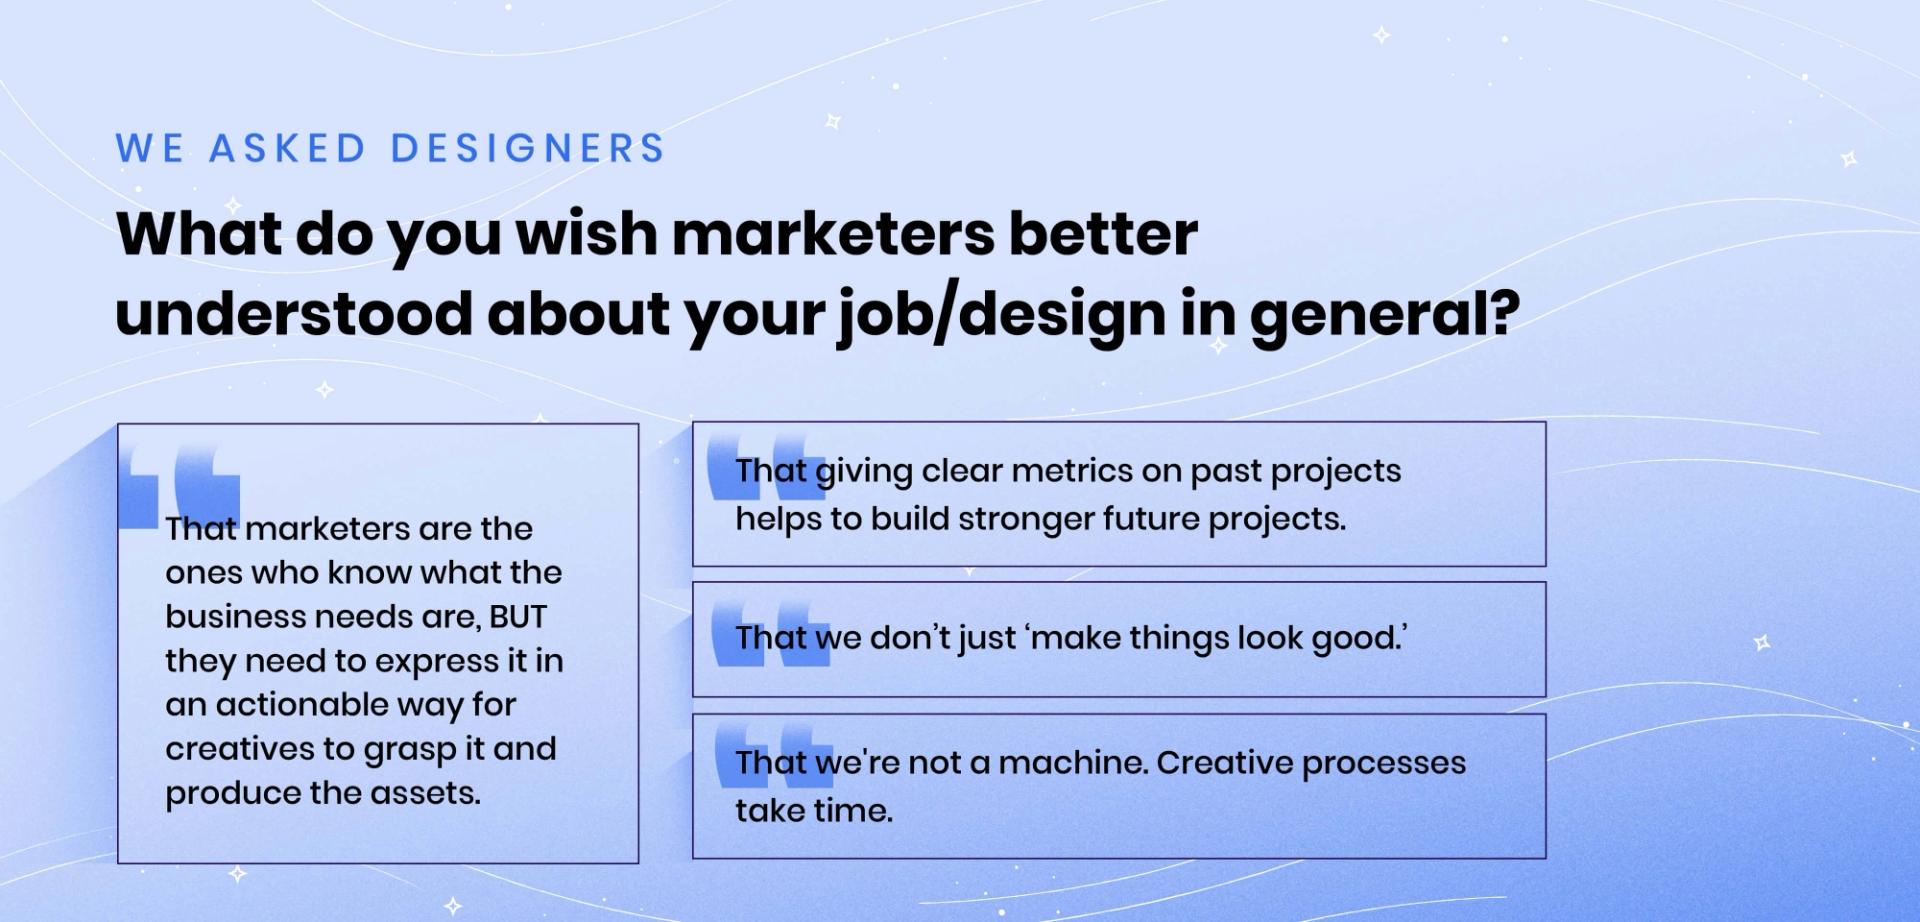 What do you wish marketers better understood about your job/design in general?